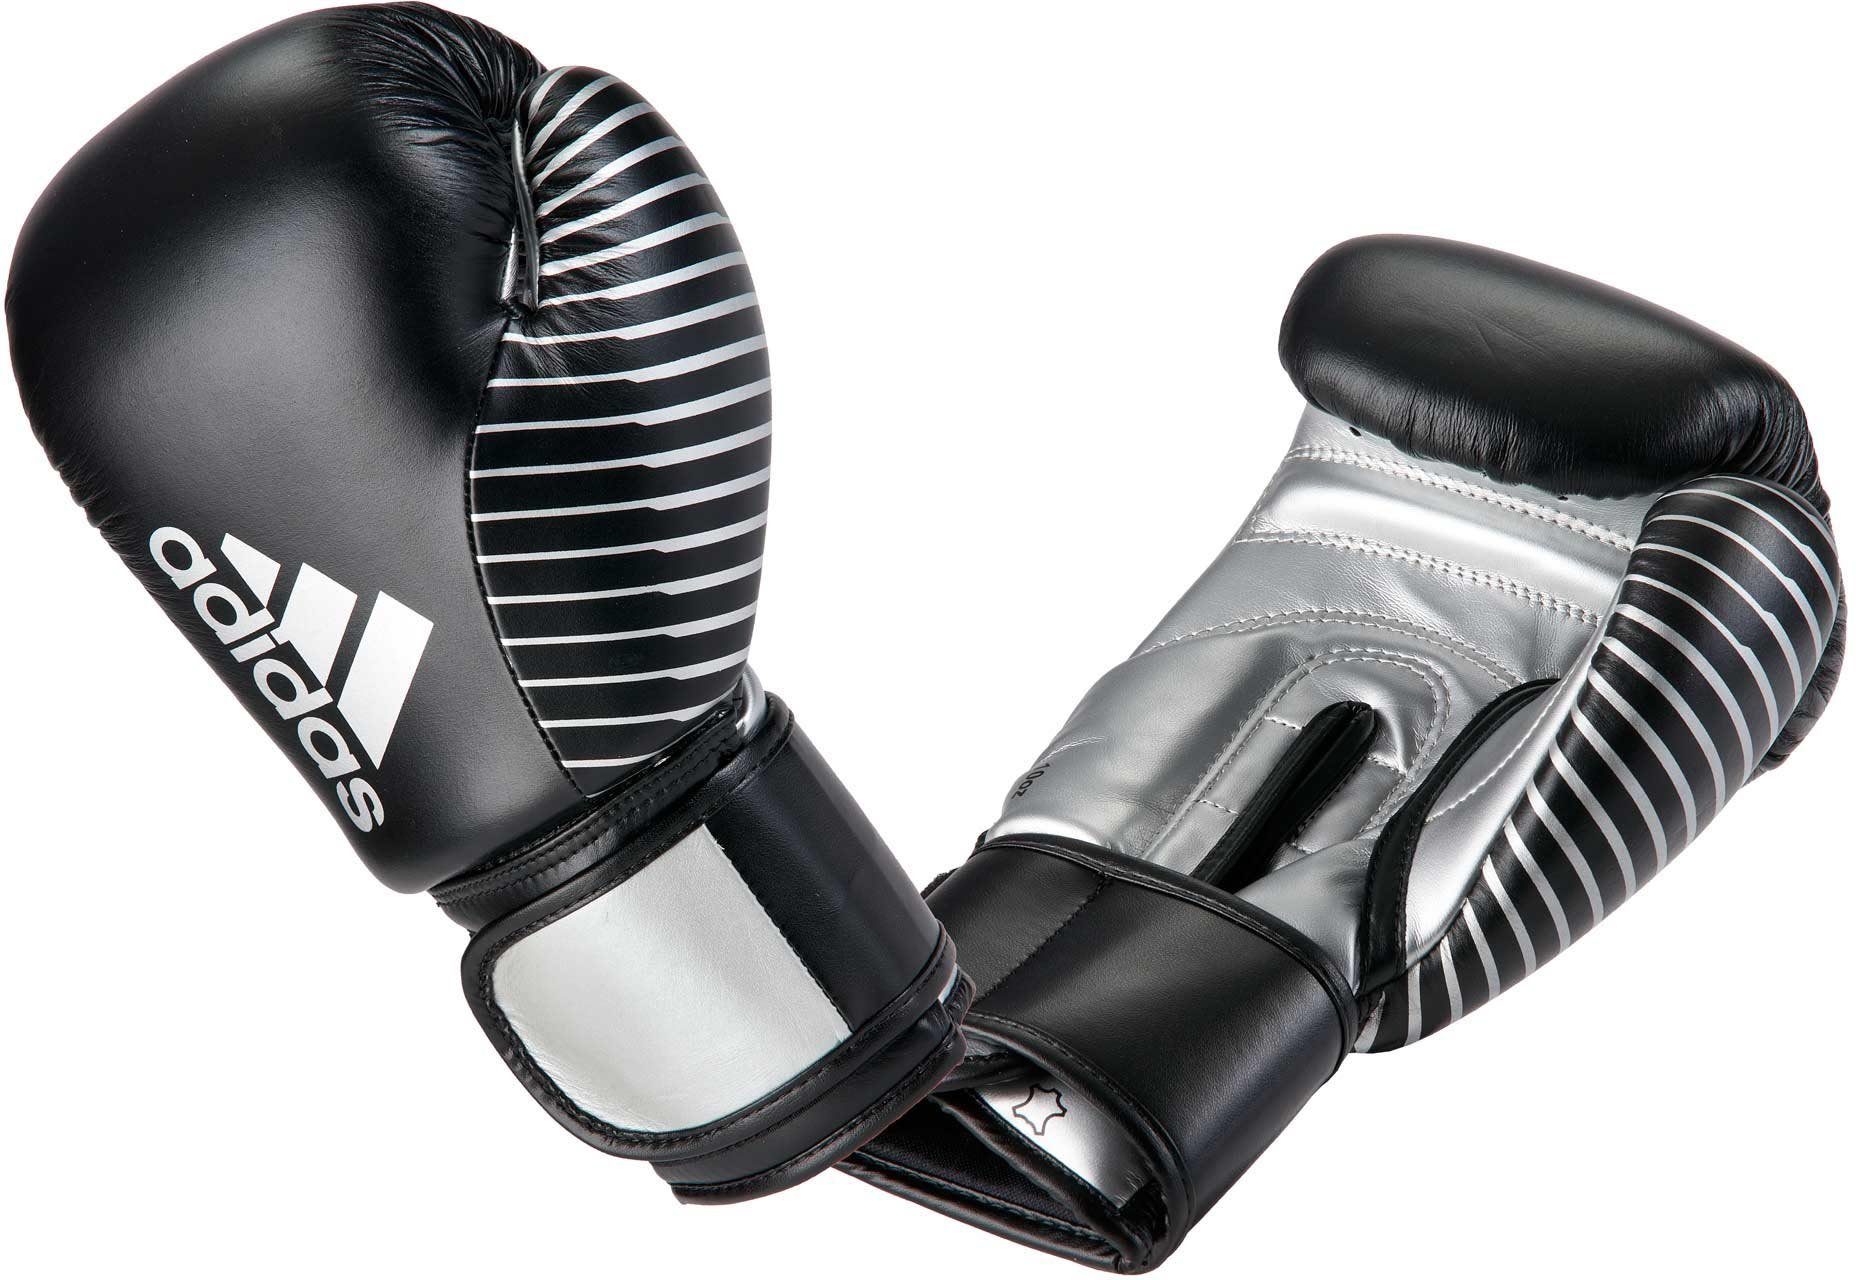 adidas Performance Boxhandschuhe Competition Handschuh black/silver | Boxhandschuhe